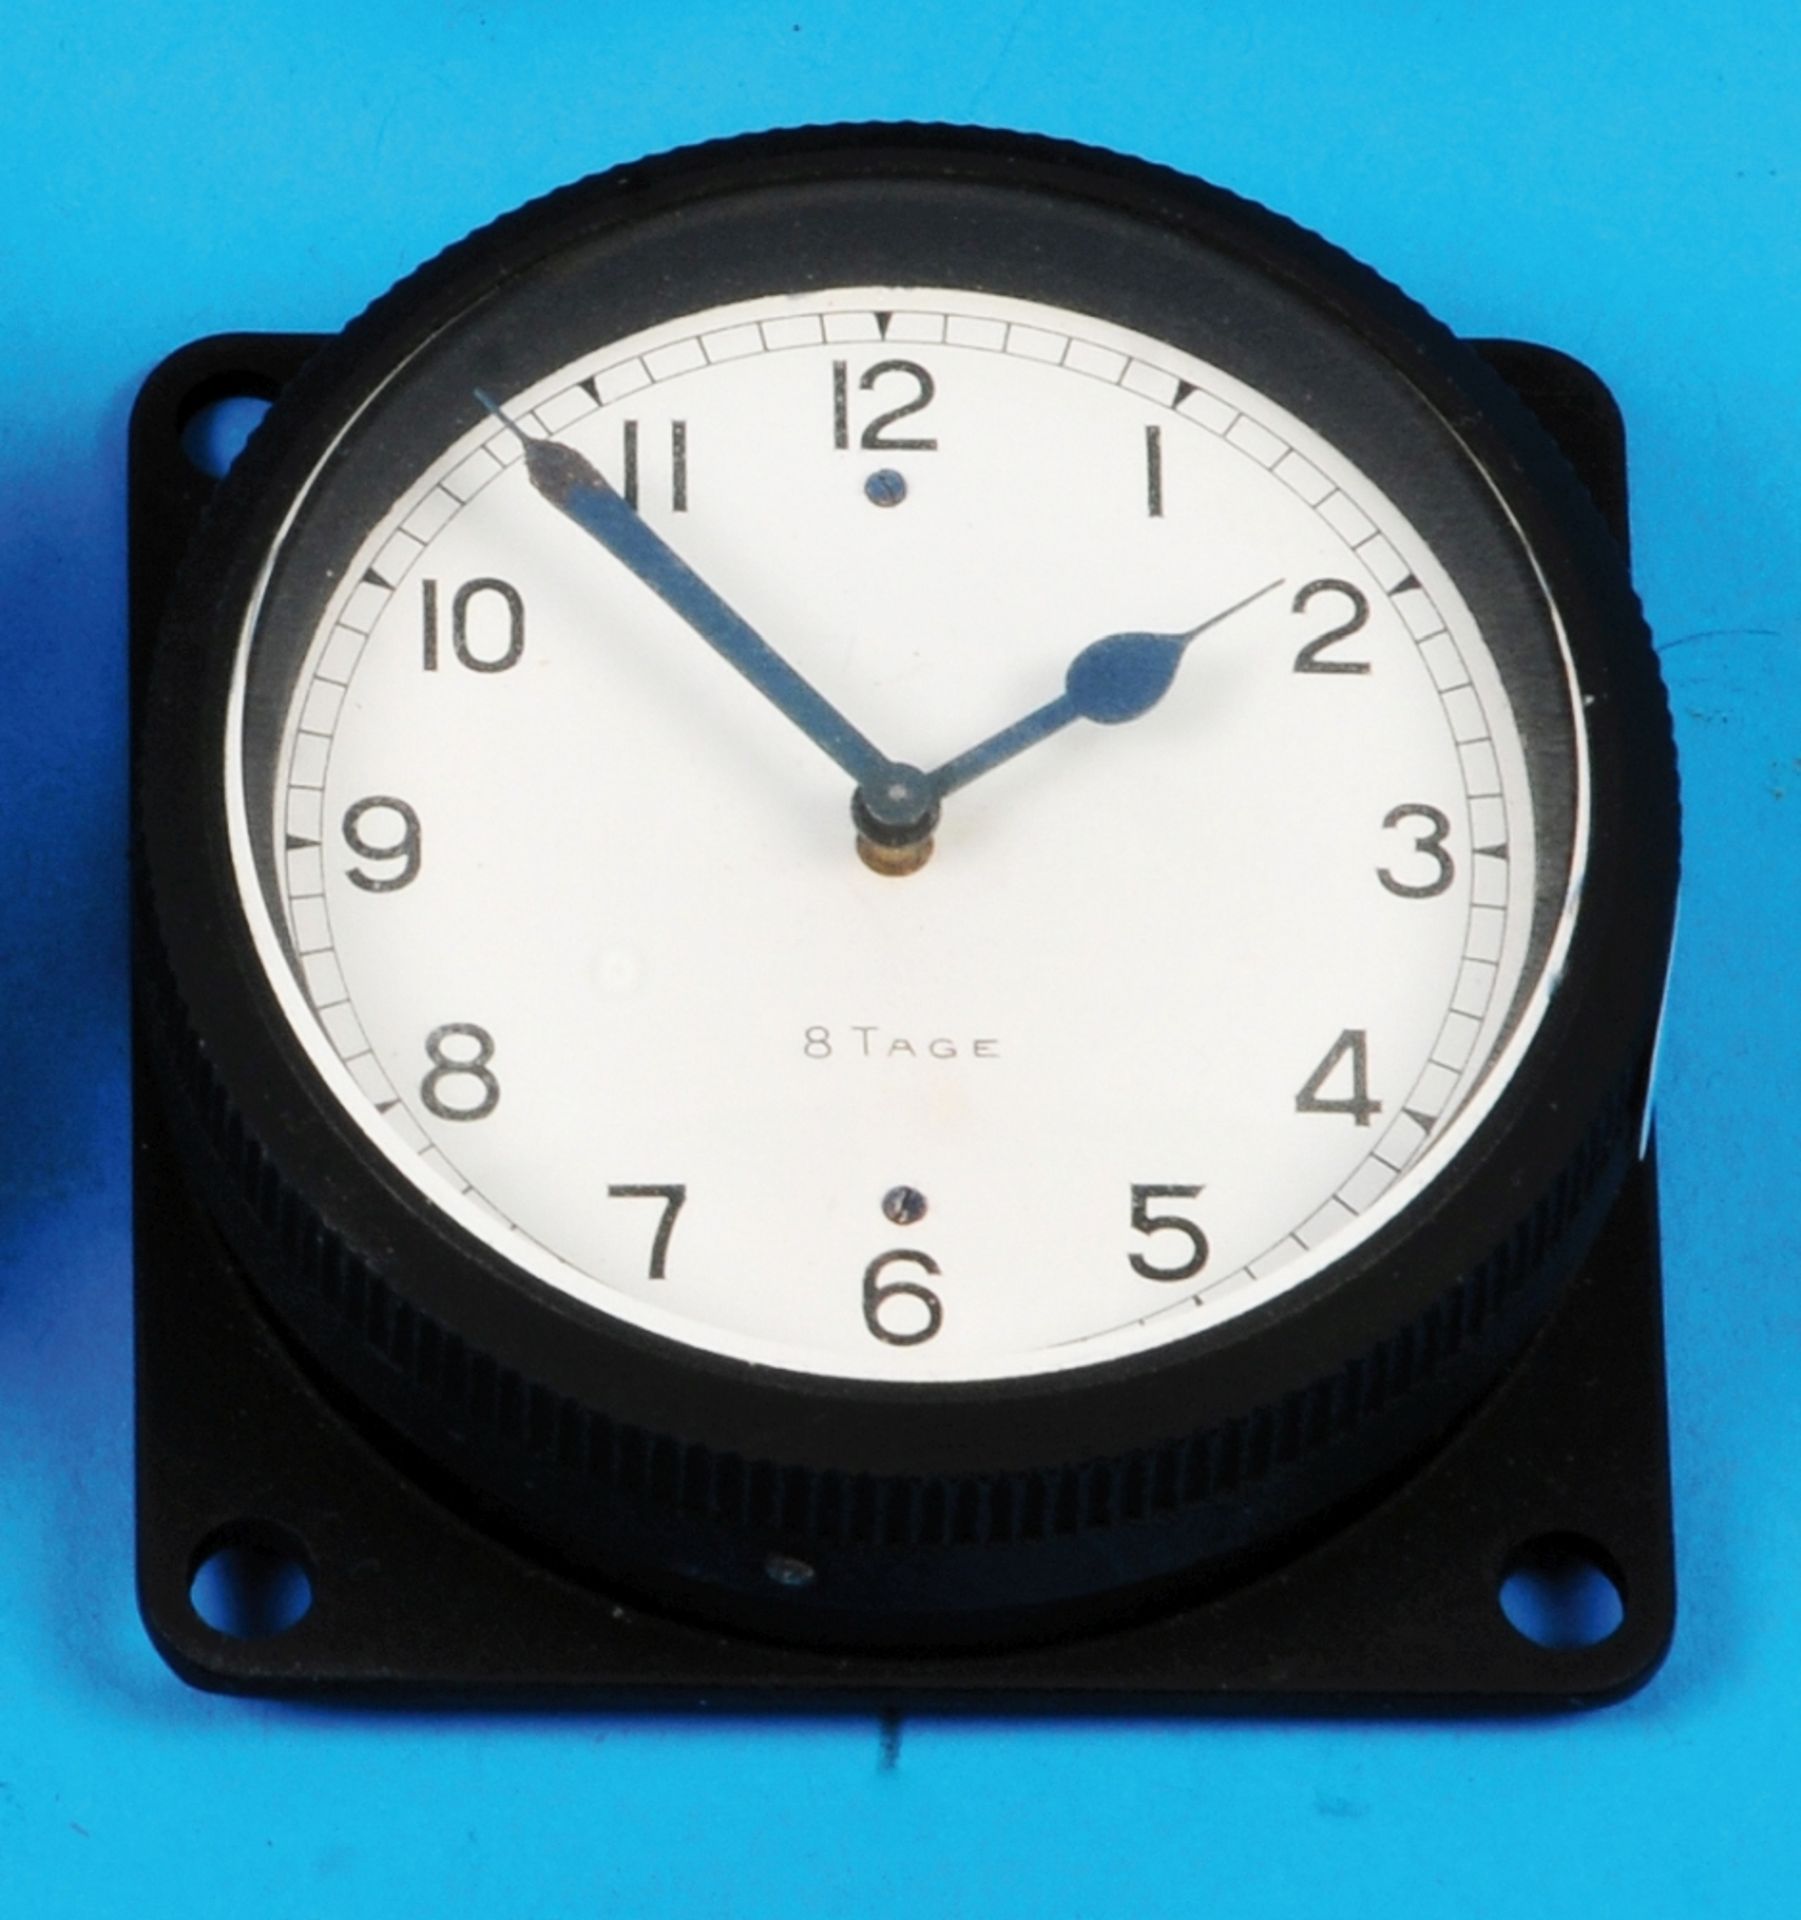 Onboard clock with 8-day movement, black case, white dial with Arabic numerals, 